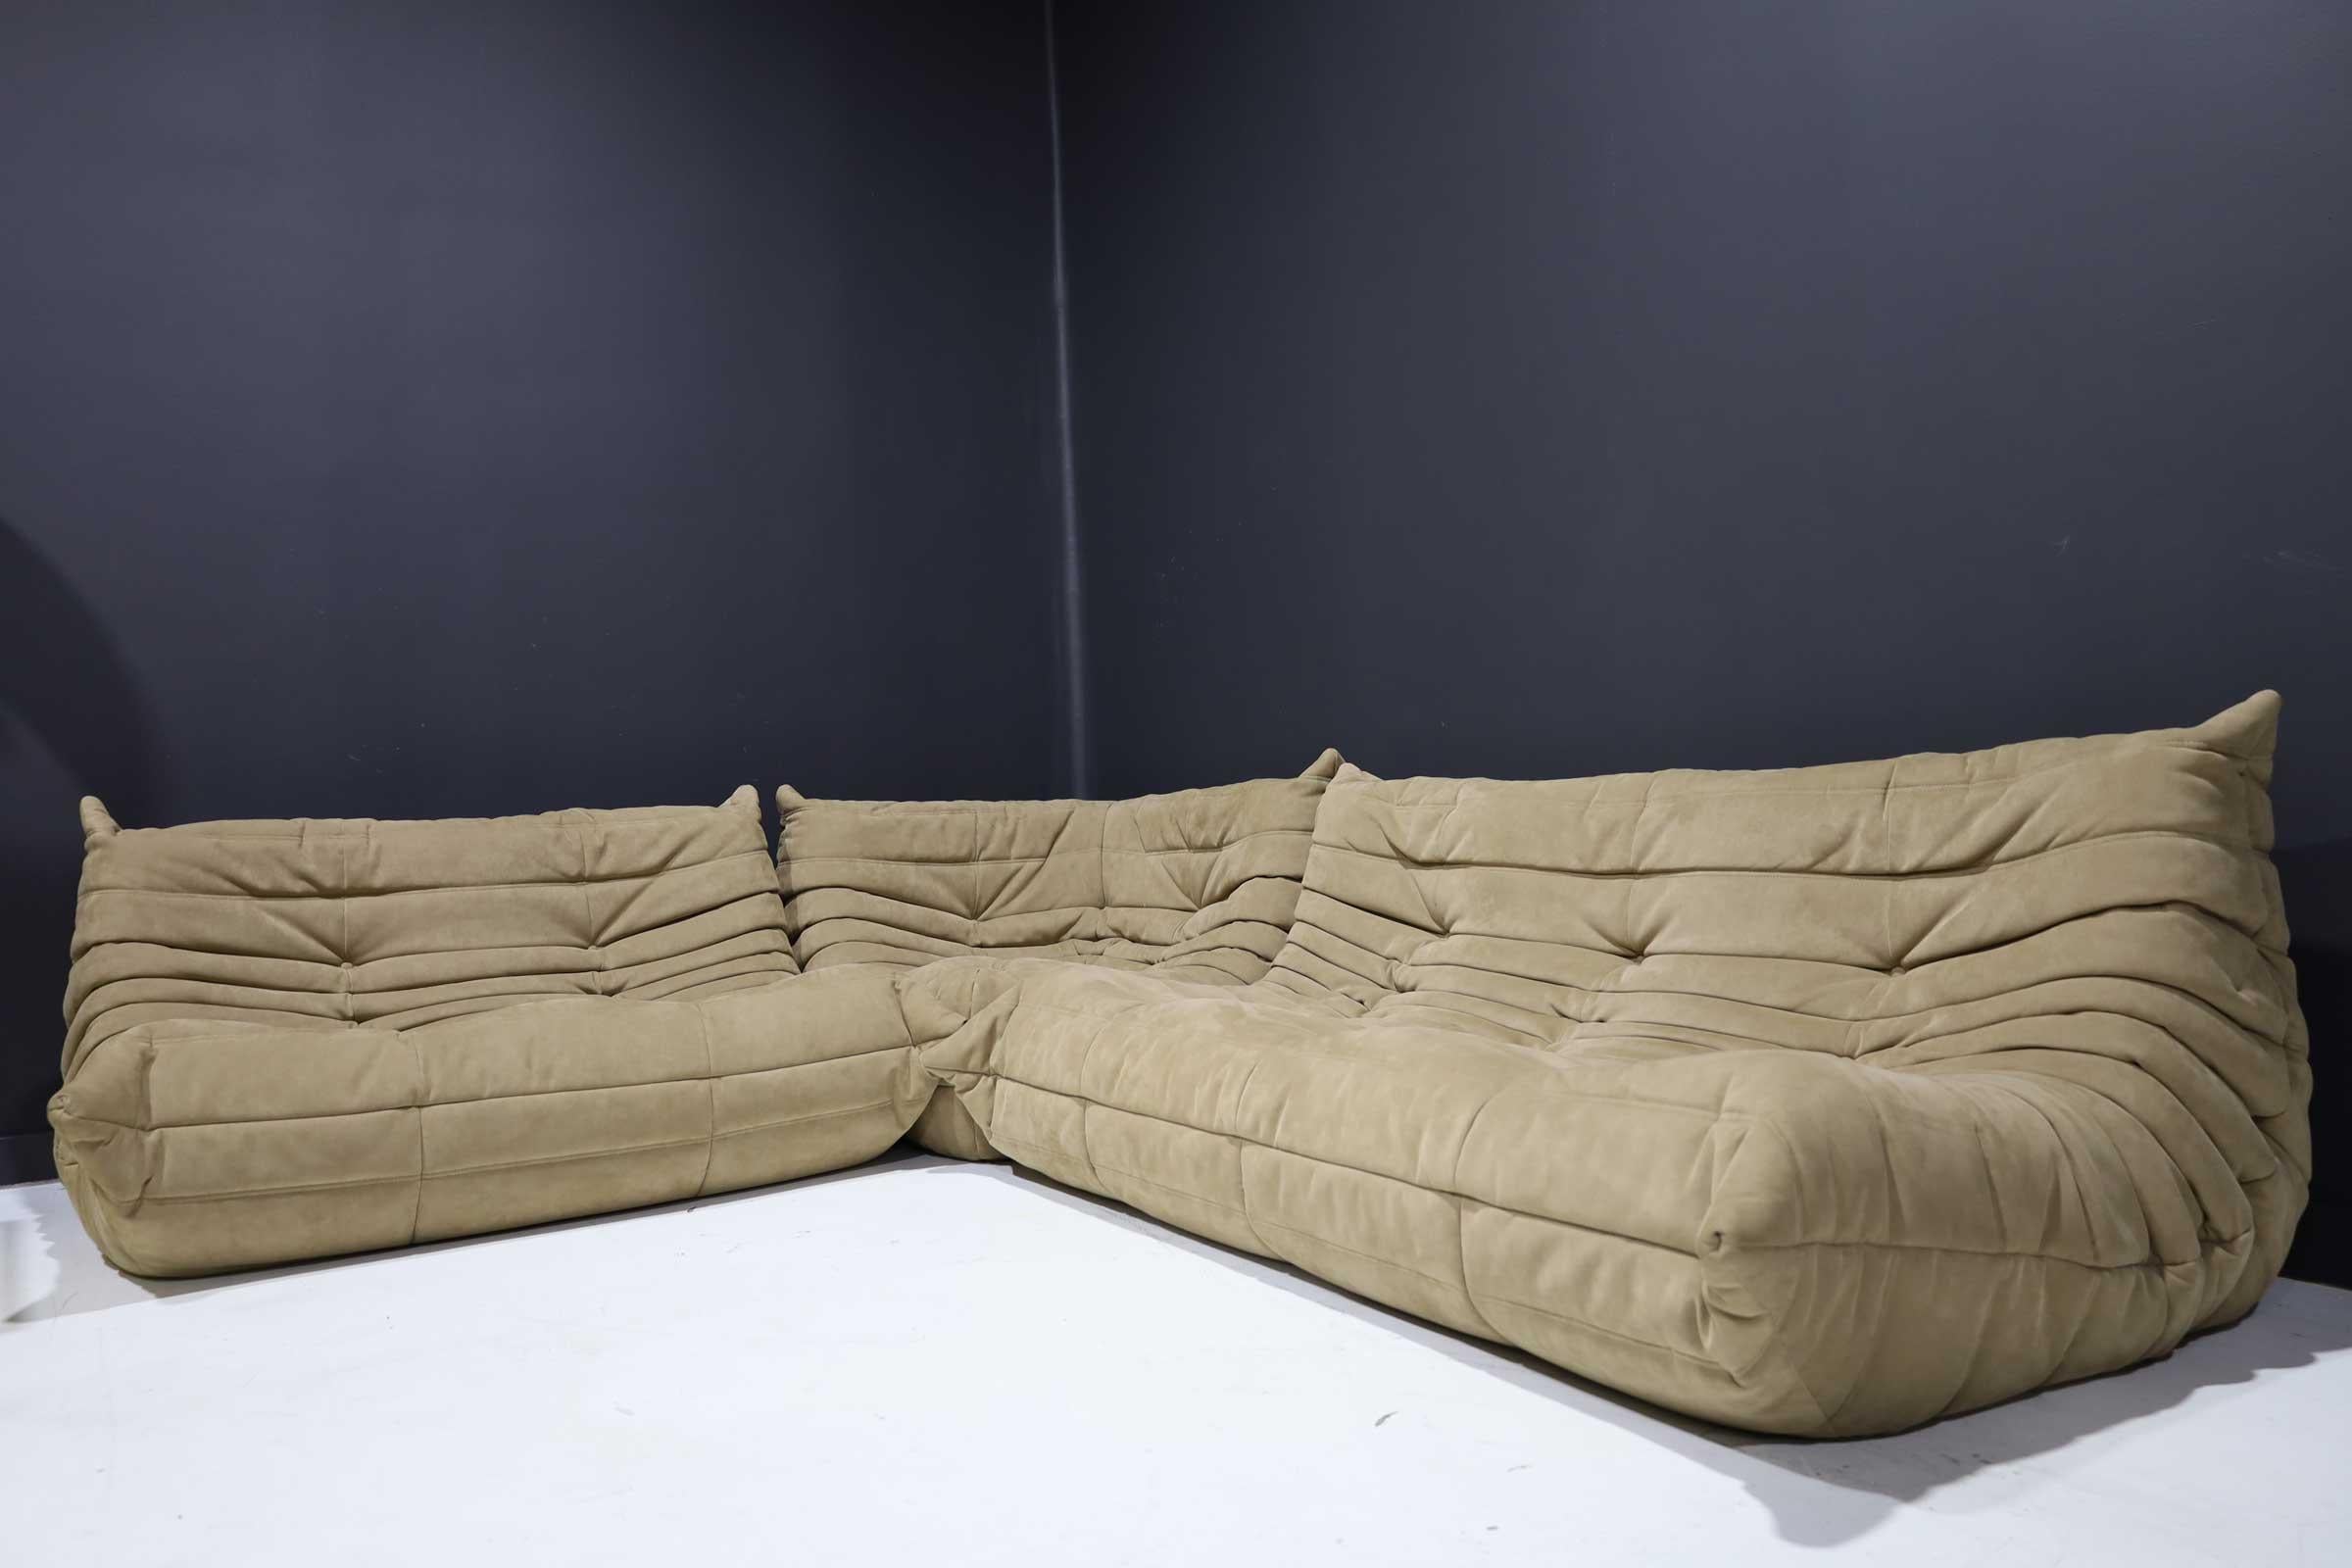 Beautiful 3 section Togo sofa by Michel Ducaroy in tan Alcantara suede. Very clean, like new. Each section measures as follows:

Measures: 2 seater - 28